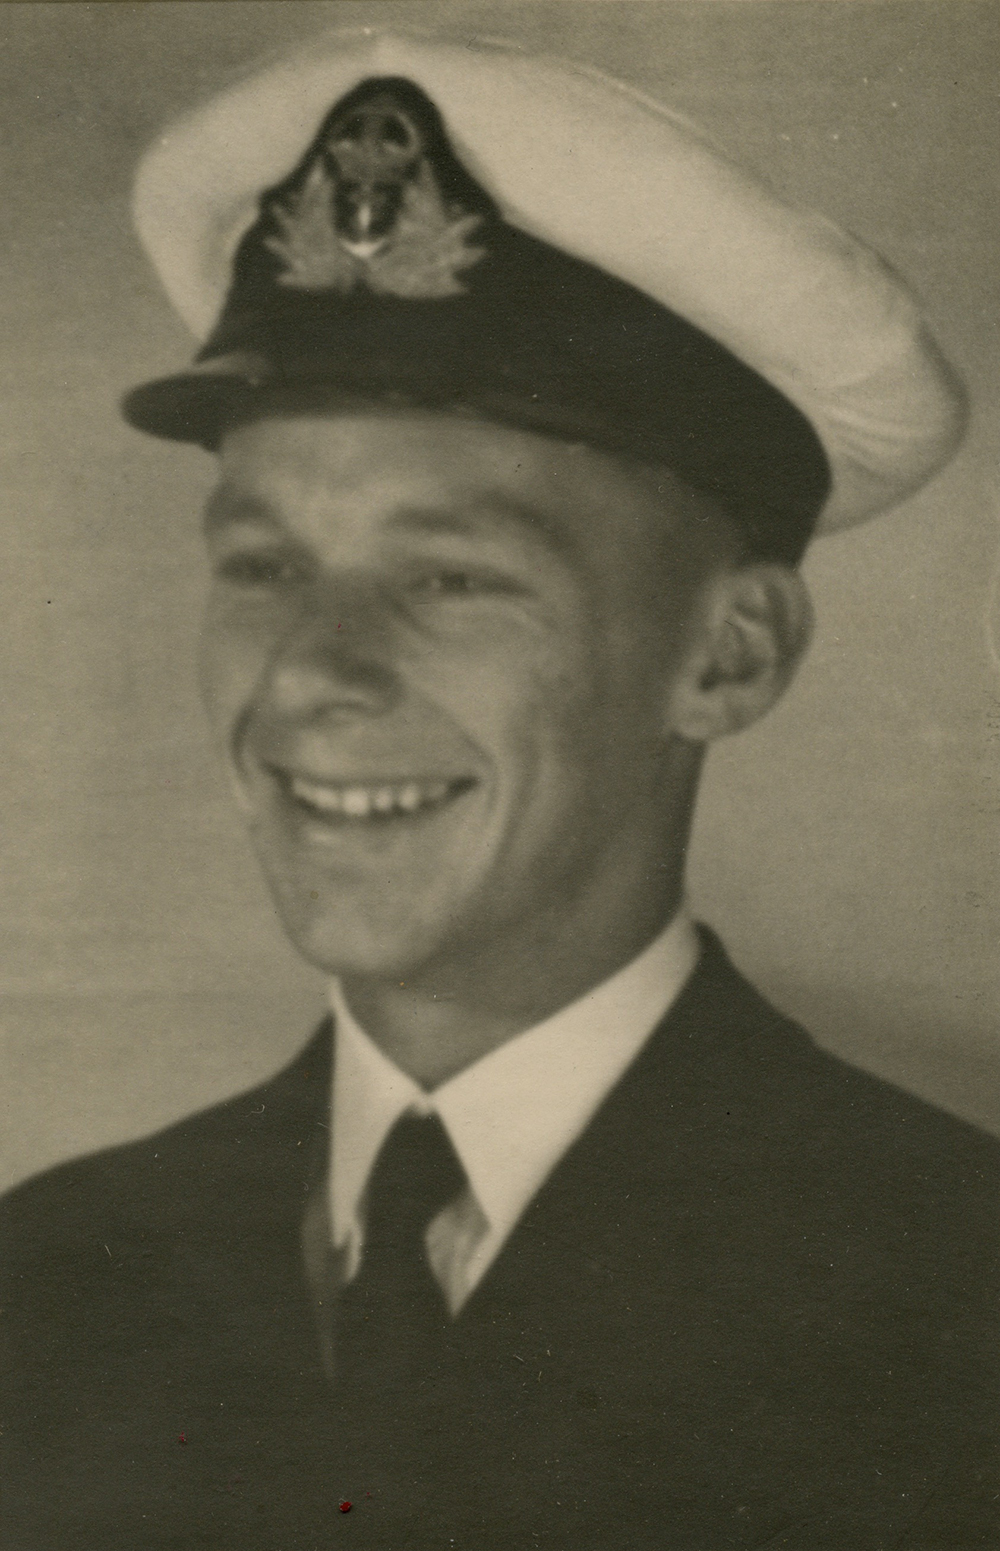 Stein in the navy, early 1940s. Courtesy of Sarah Cawkwell.